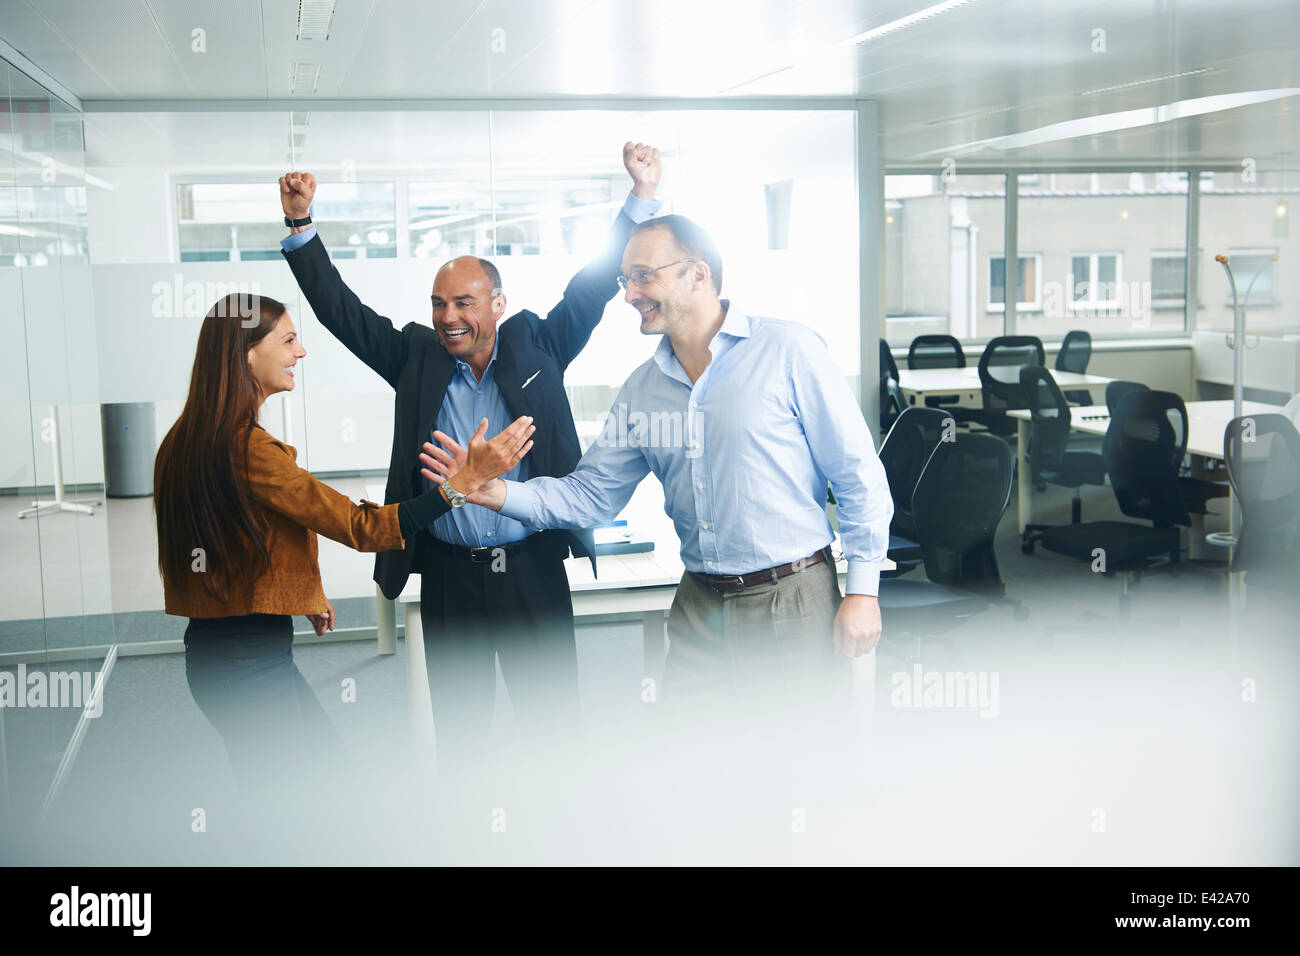 Businesspeople cheering in office Stock Photo